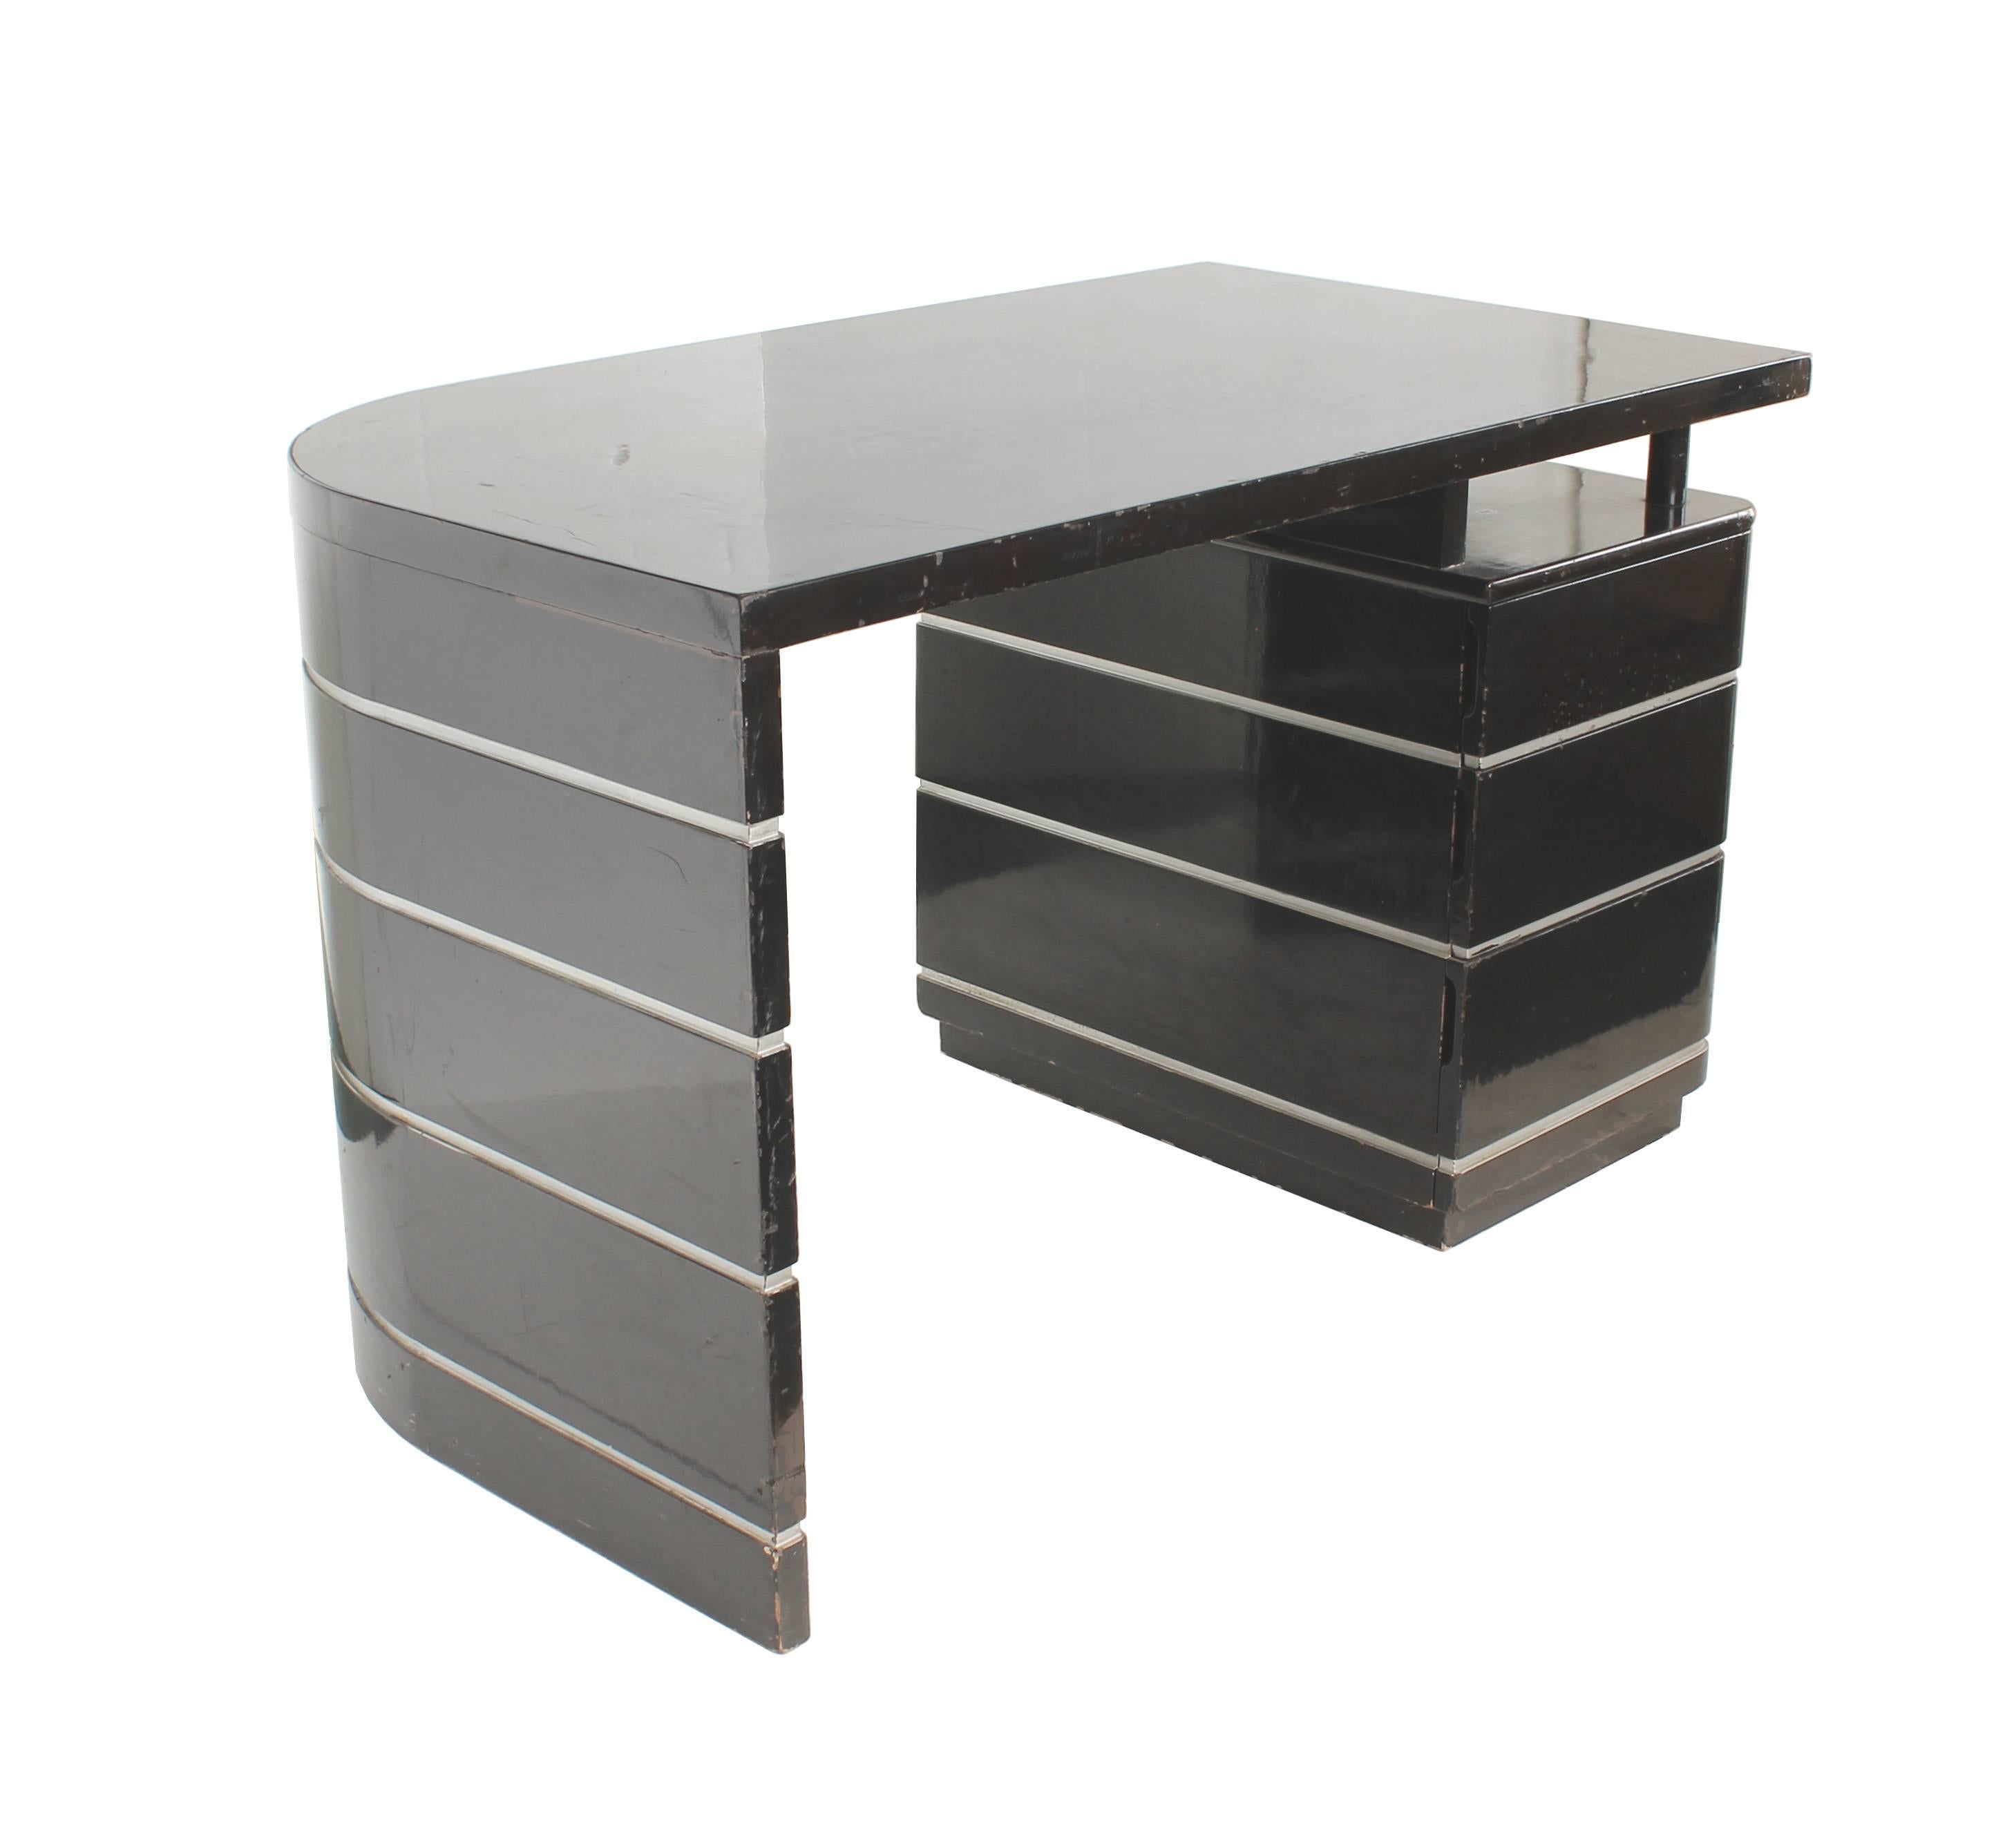 Curved desk in black lacquer silver grooves with drawers. Attributed to Paul Frankl. Classic Art Deco lines. Has three drawers. Lacquer has some chips and scratches, especially along the edges. Structurally sound.

Architect, Sandy Littman of